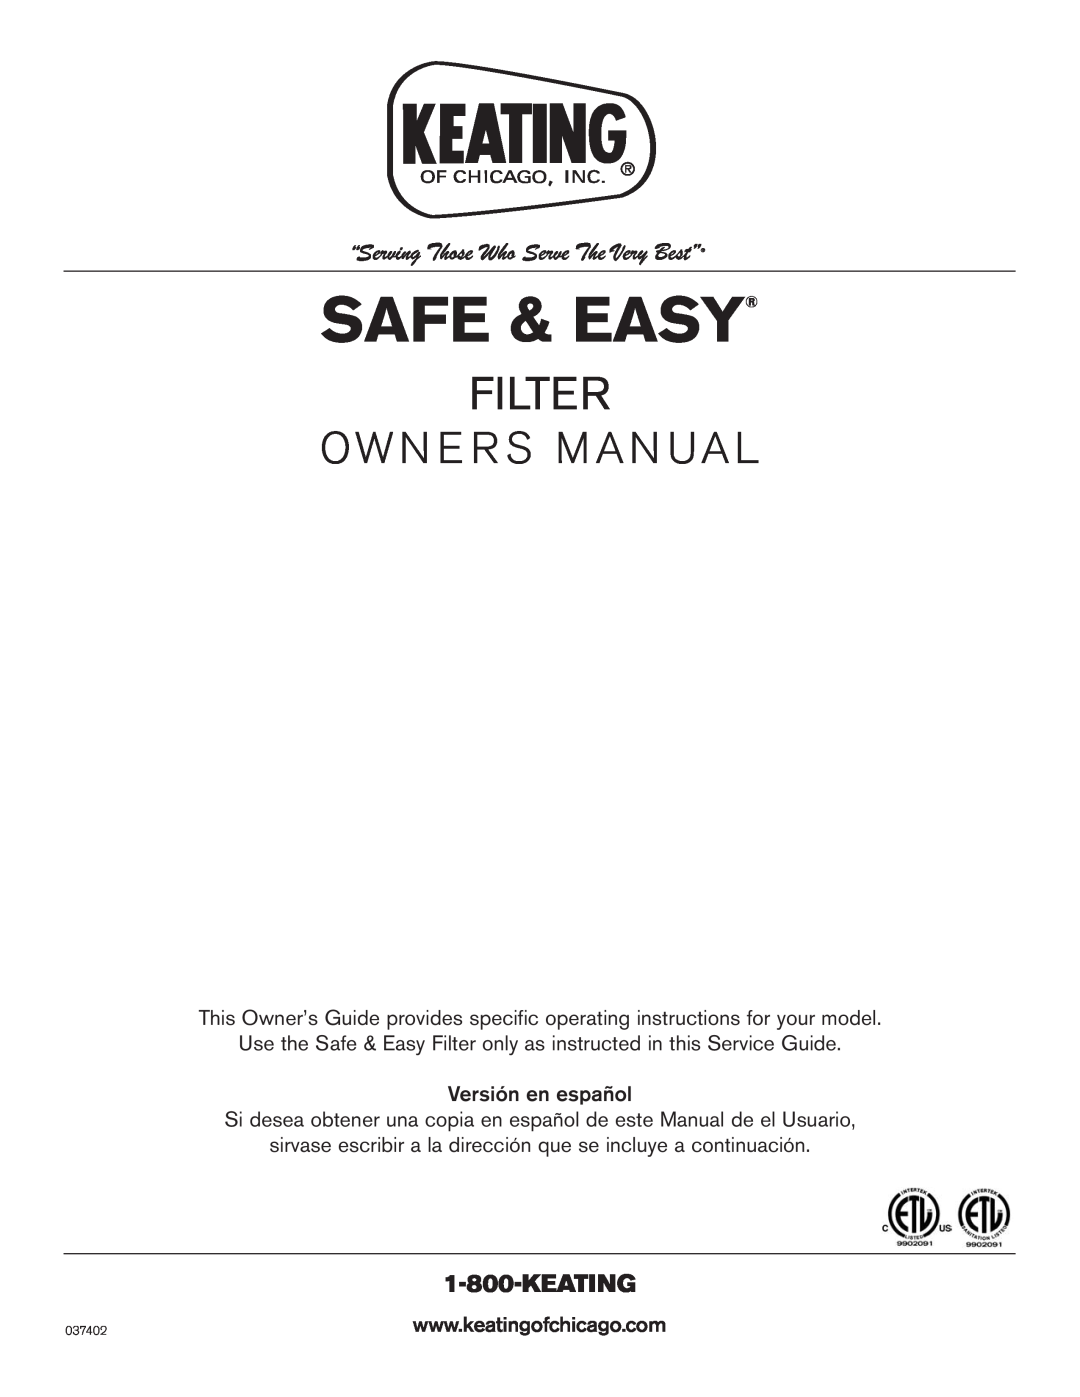 Keating Of Chicago 1-800 owner manual Safe & Easy, Filter, Own E R S Man Ual 